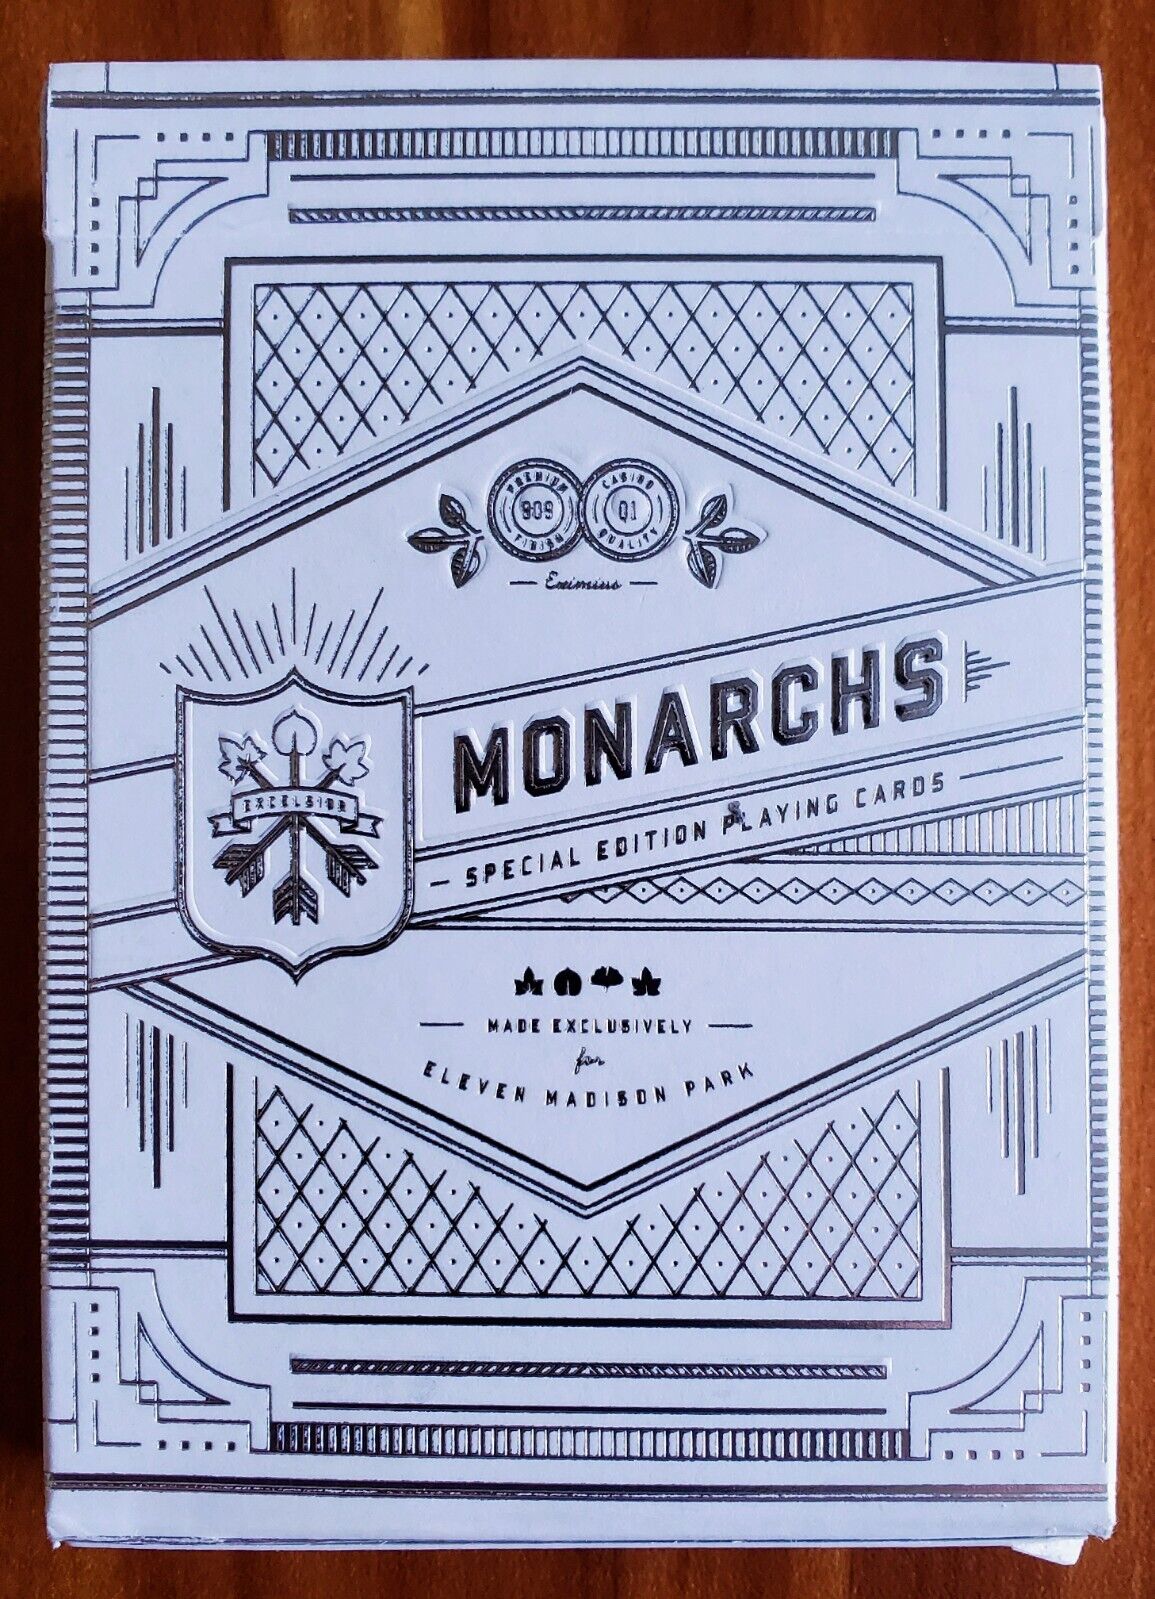 RARE theory11 Monarch Playing Cards - Eleven Madison Park version